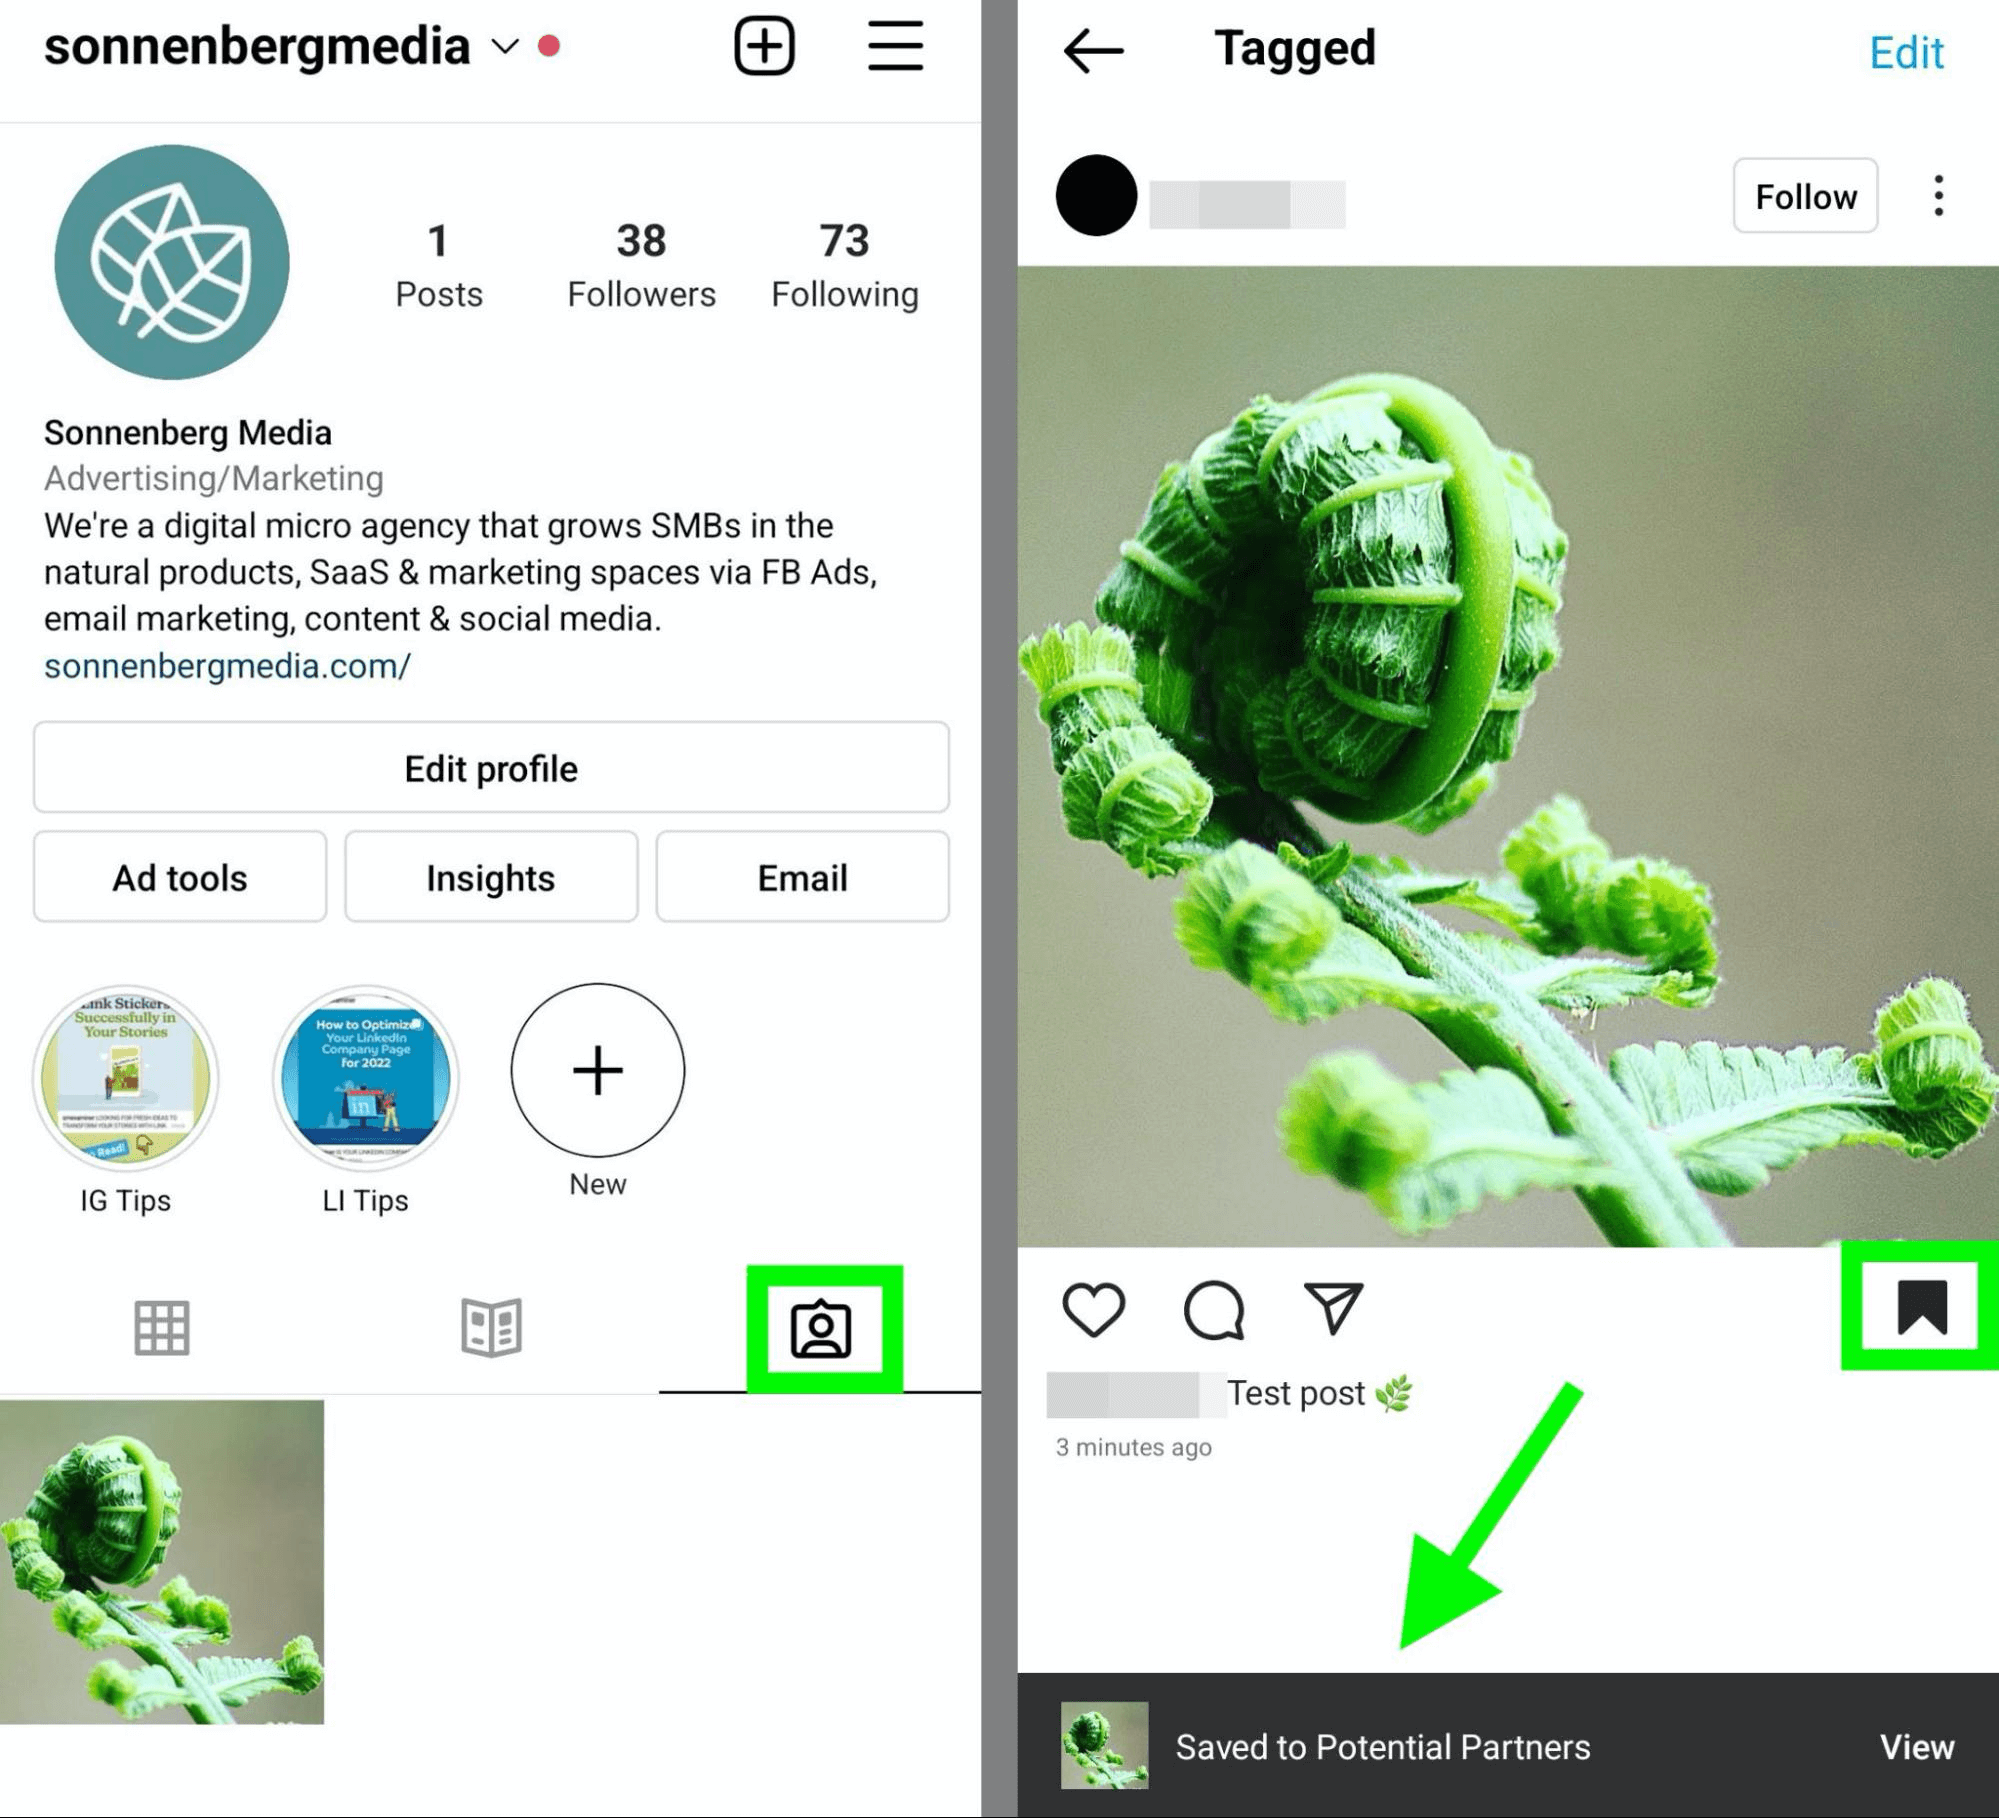 image of tagged content on Instagram business profile